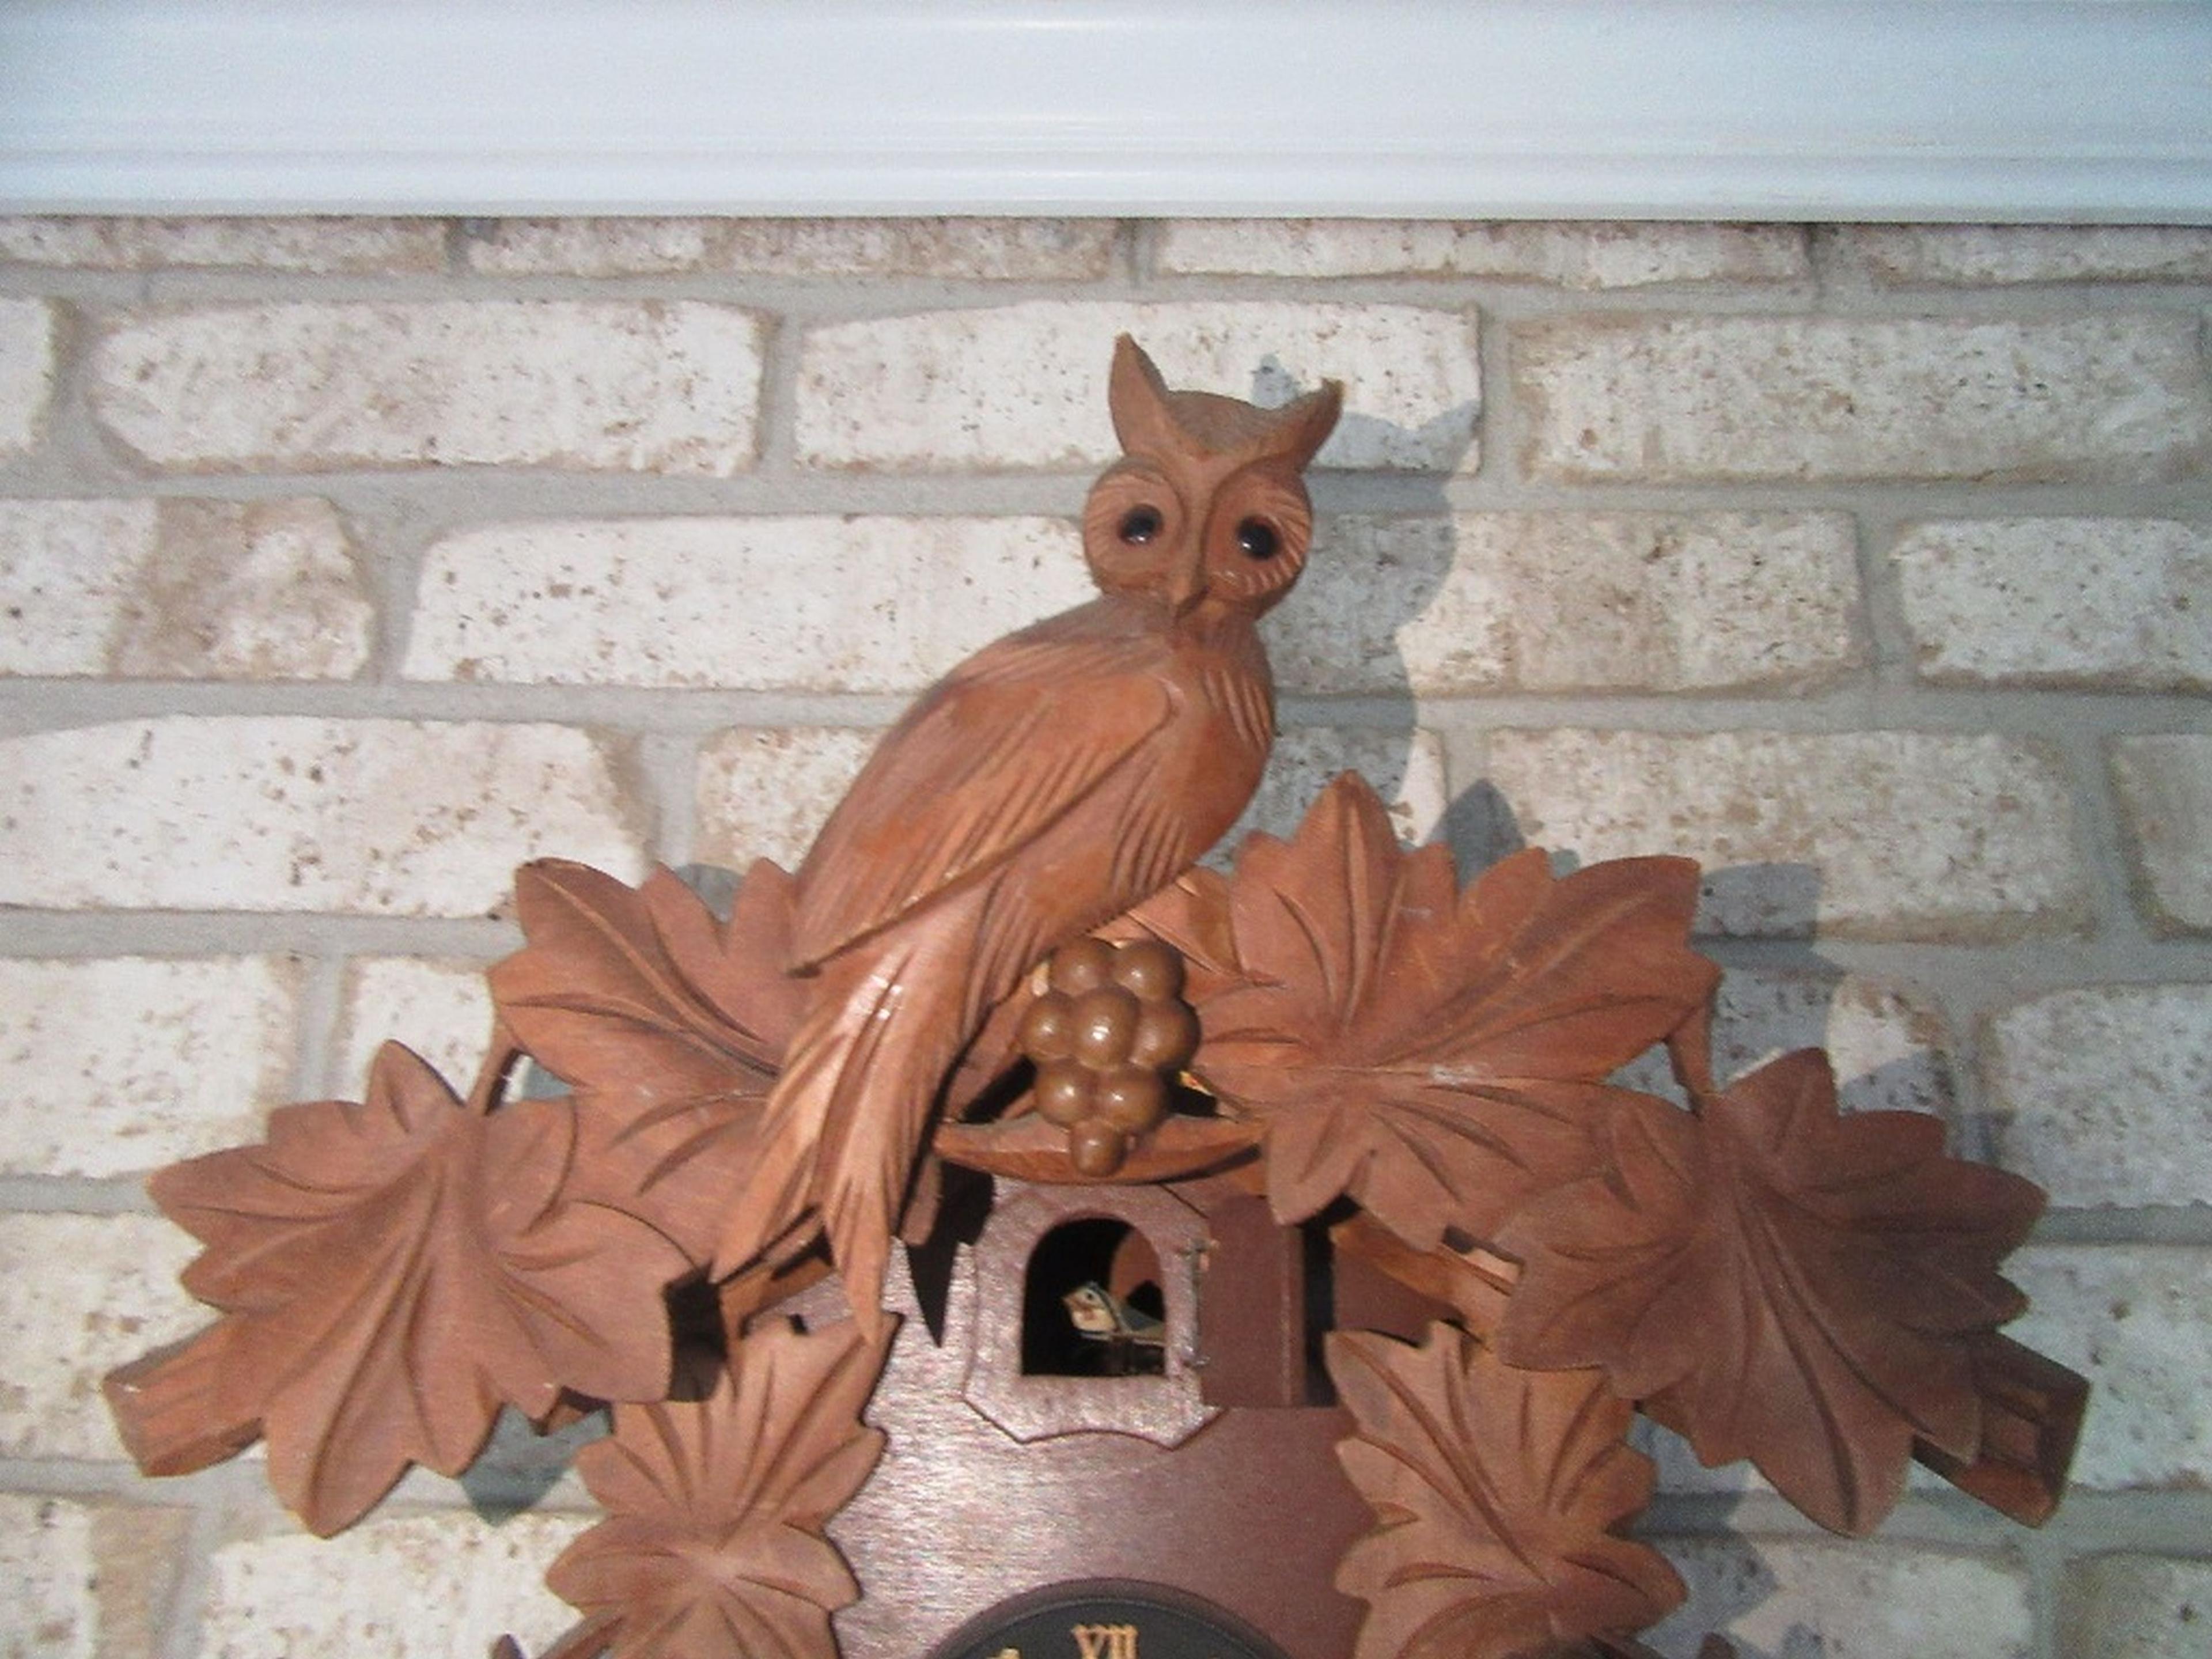 OWL & FOX CARVED CUCKOO CLOCK. MADE IN W. GERMANY